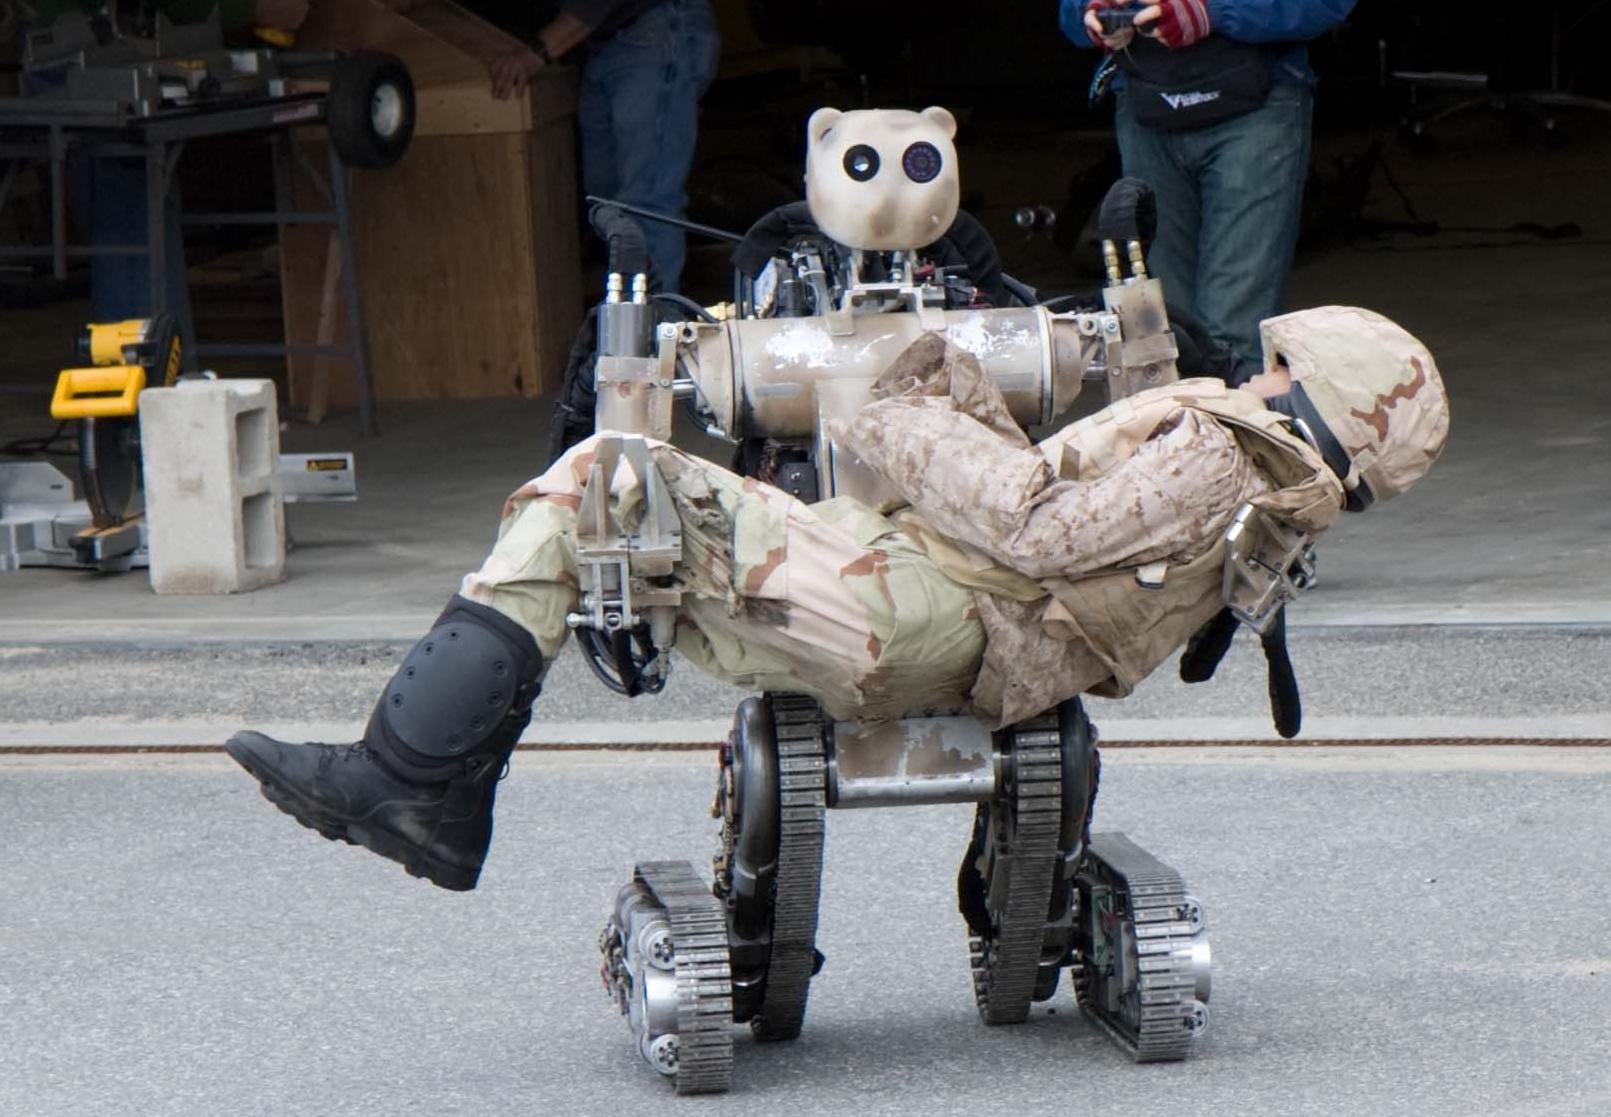 Robots to rescue wounded on battlefield | Article | The United States Army